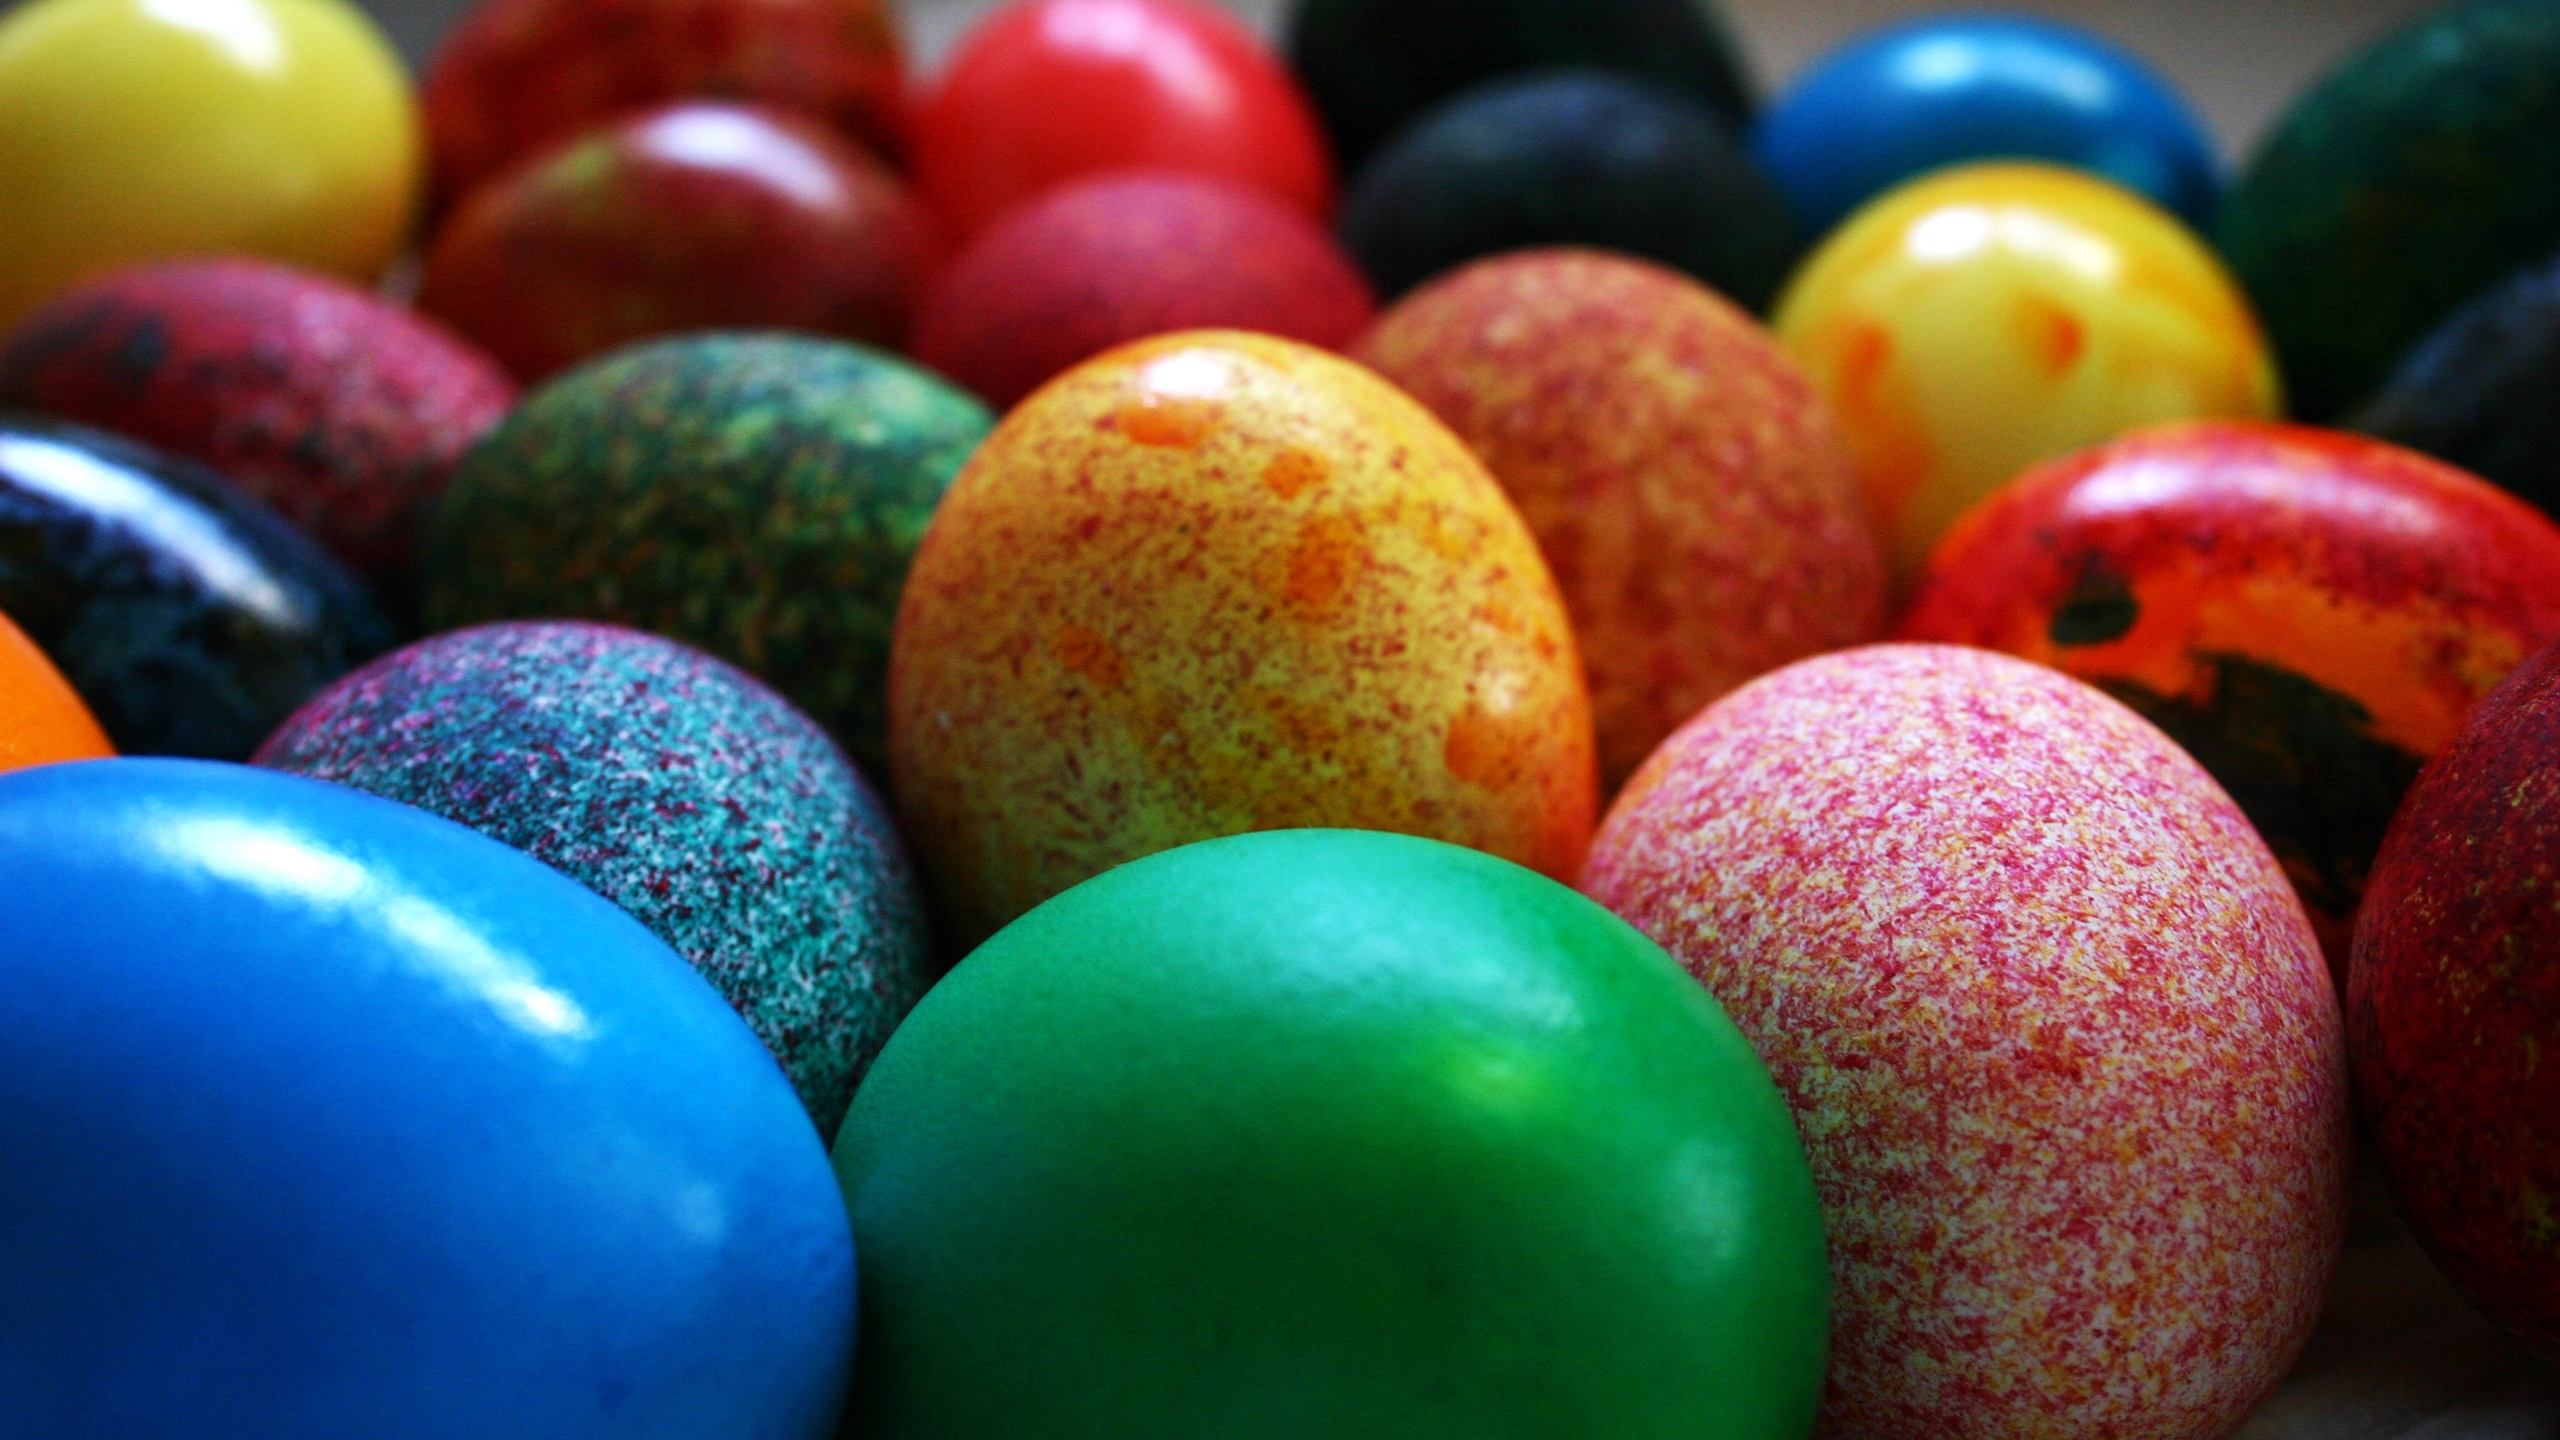 Painted Easter Eggs Close Up for 2560x1440 HDTV resolution